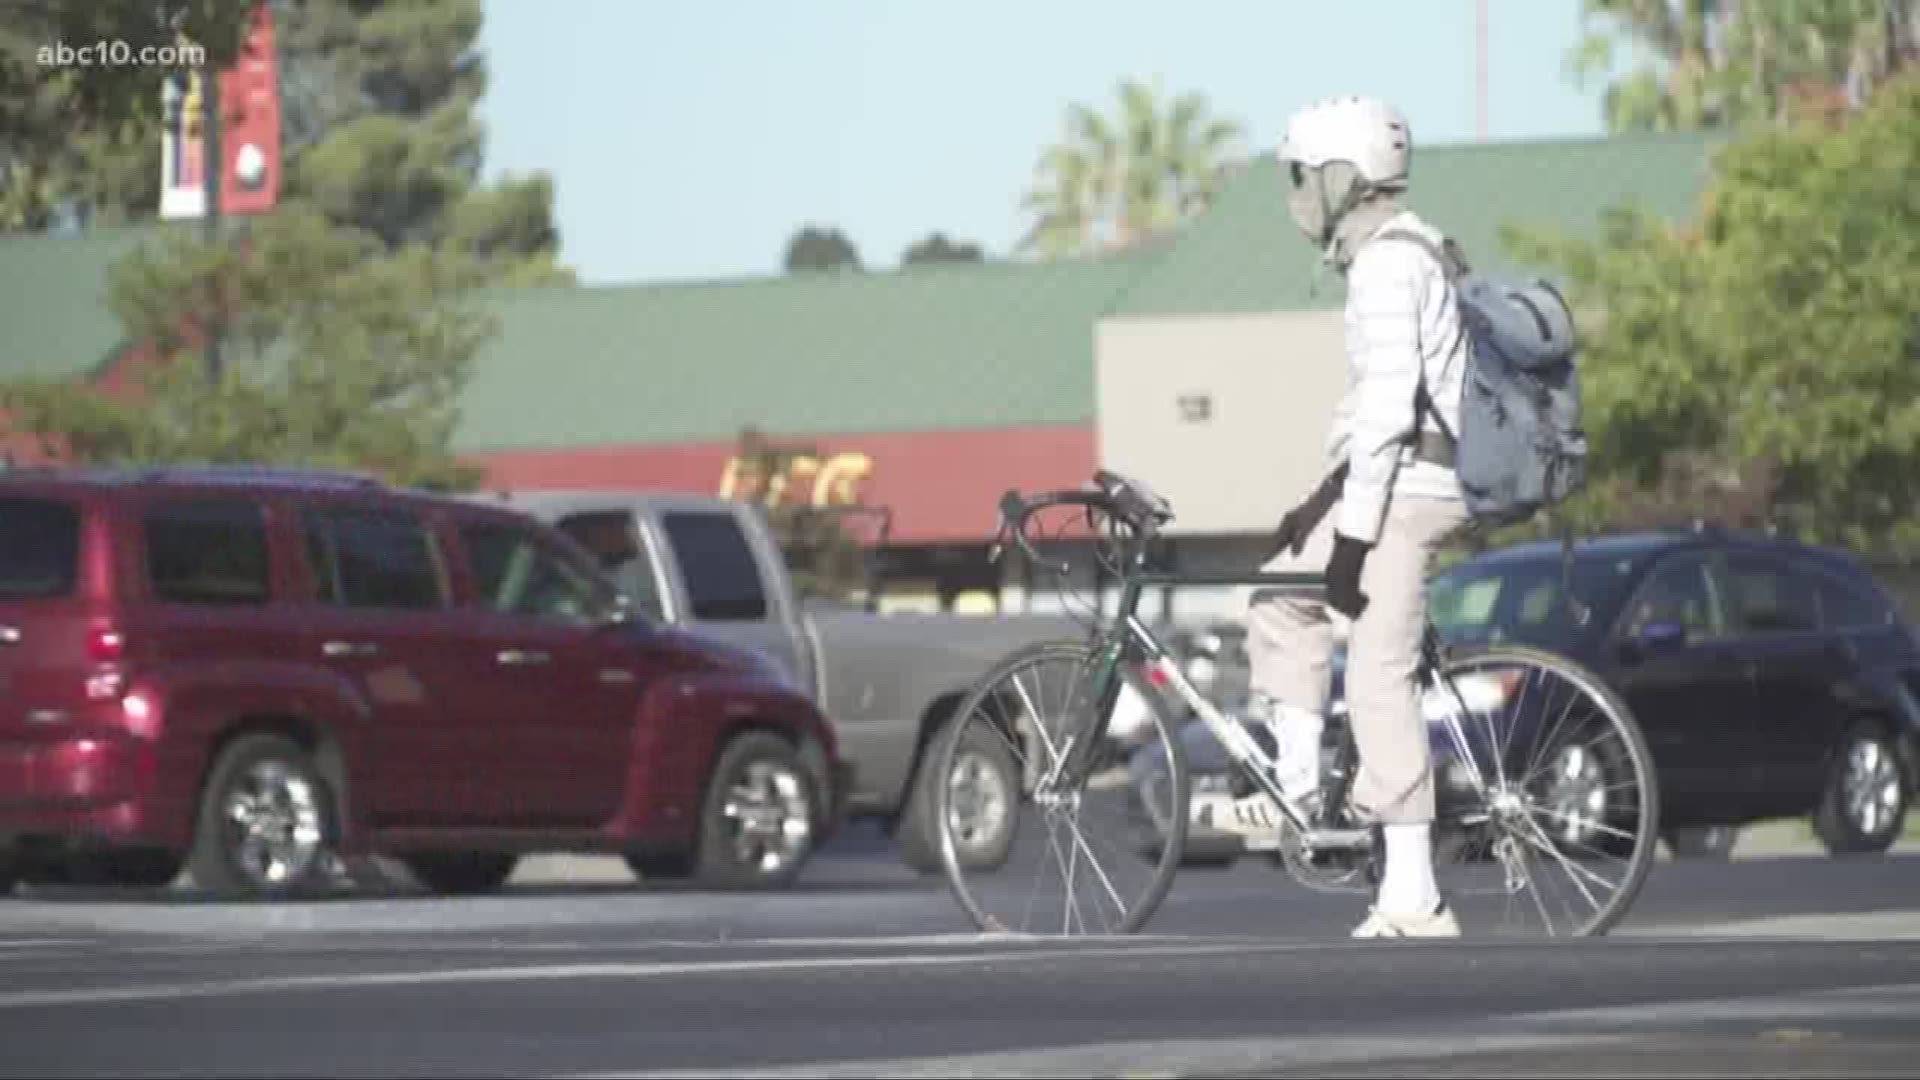 An article in Tuesday's The Wall Street Journal stated that Sacramento is the fifth deadliest city for bicyclist deaths among the 50 largest metro areas based on data from the National Highway Traffic Safety Administration.